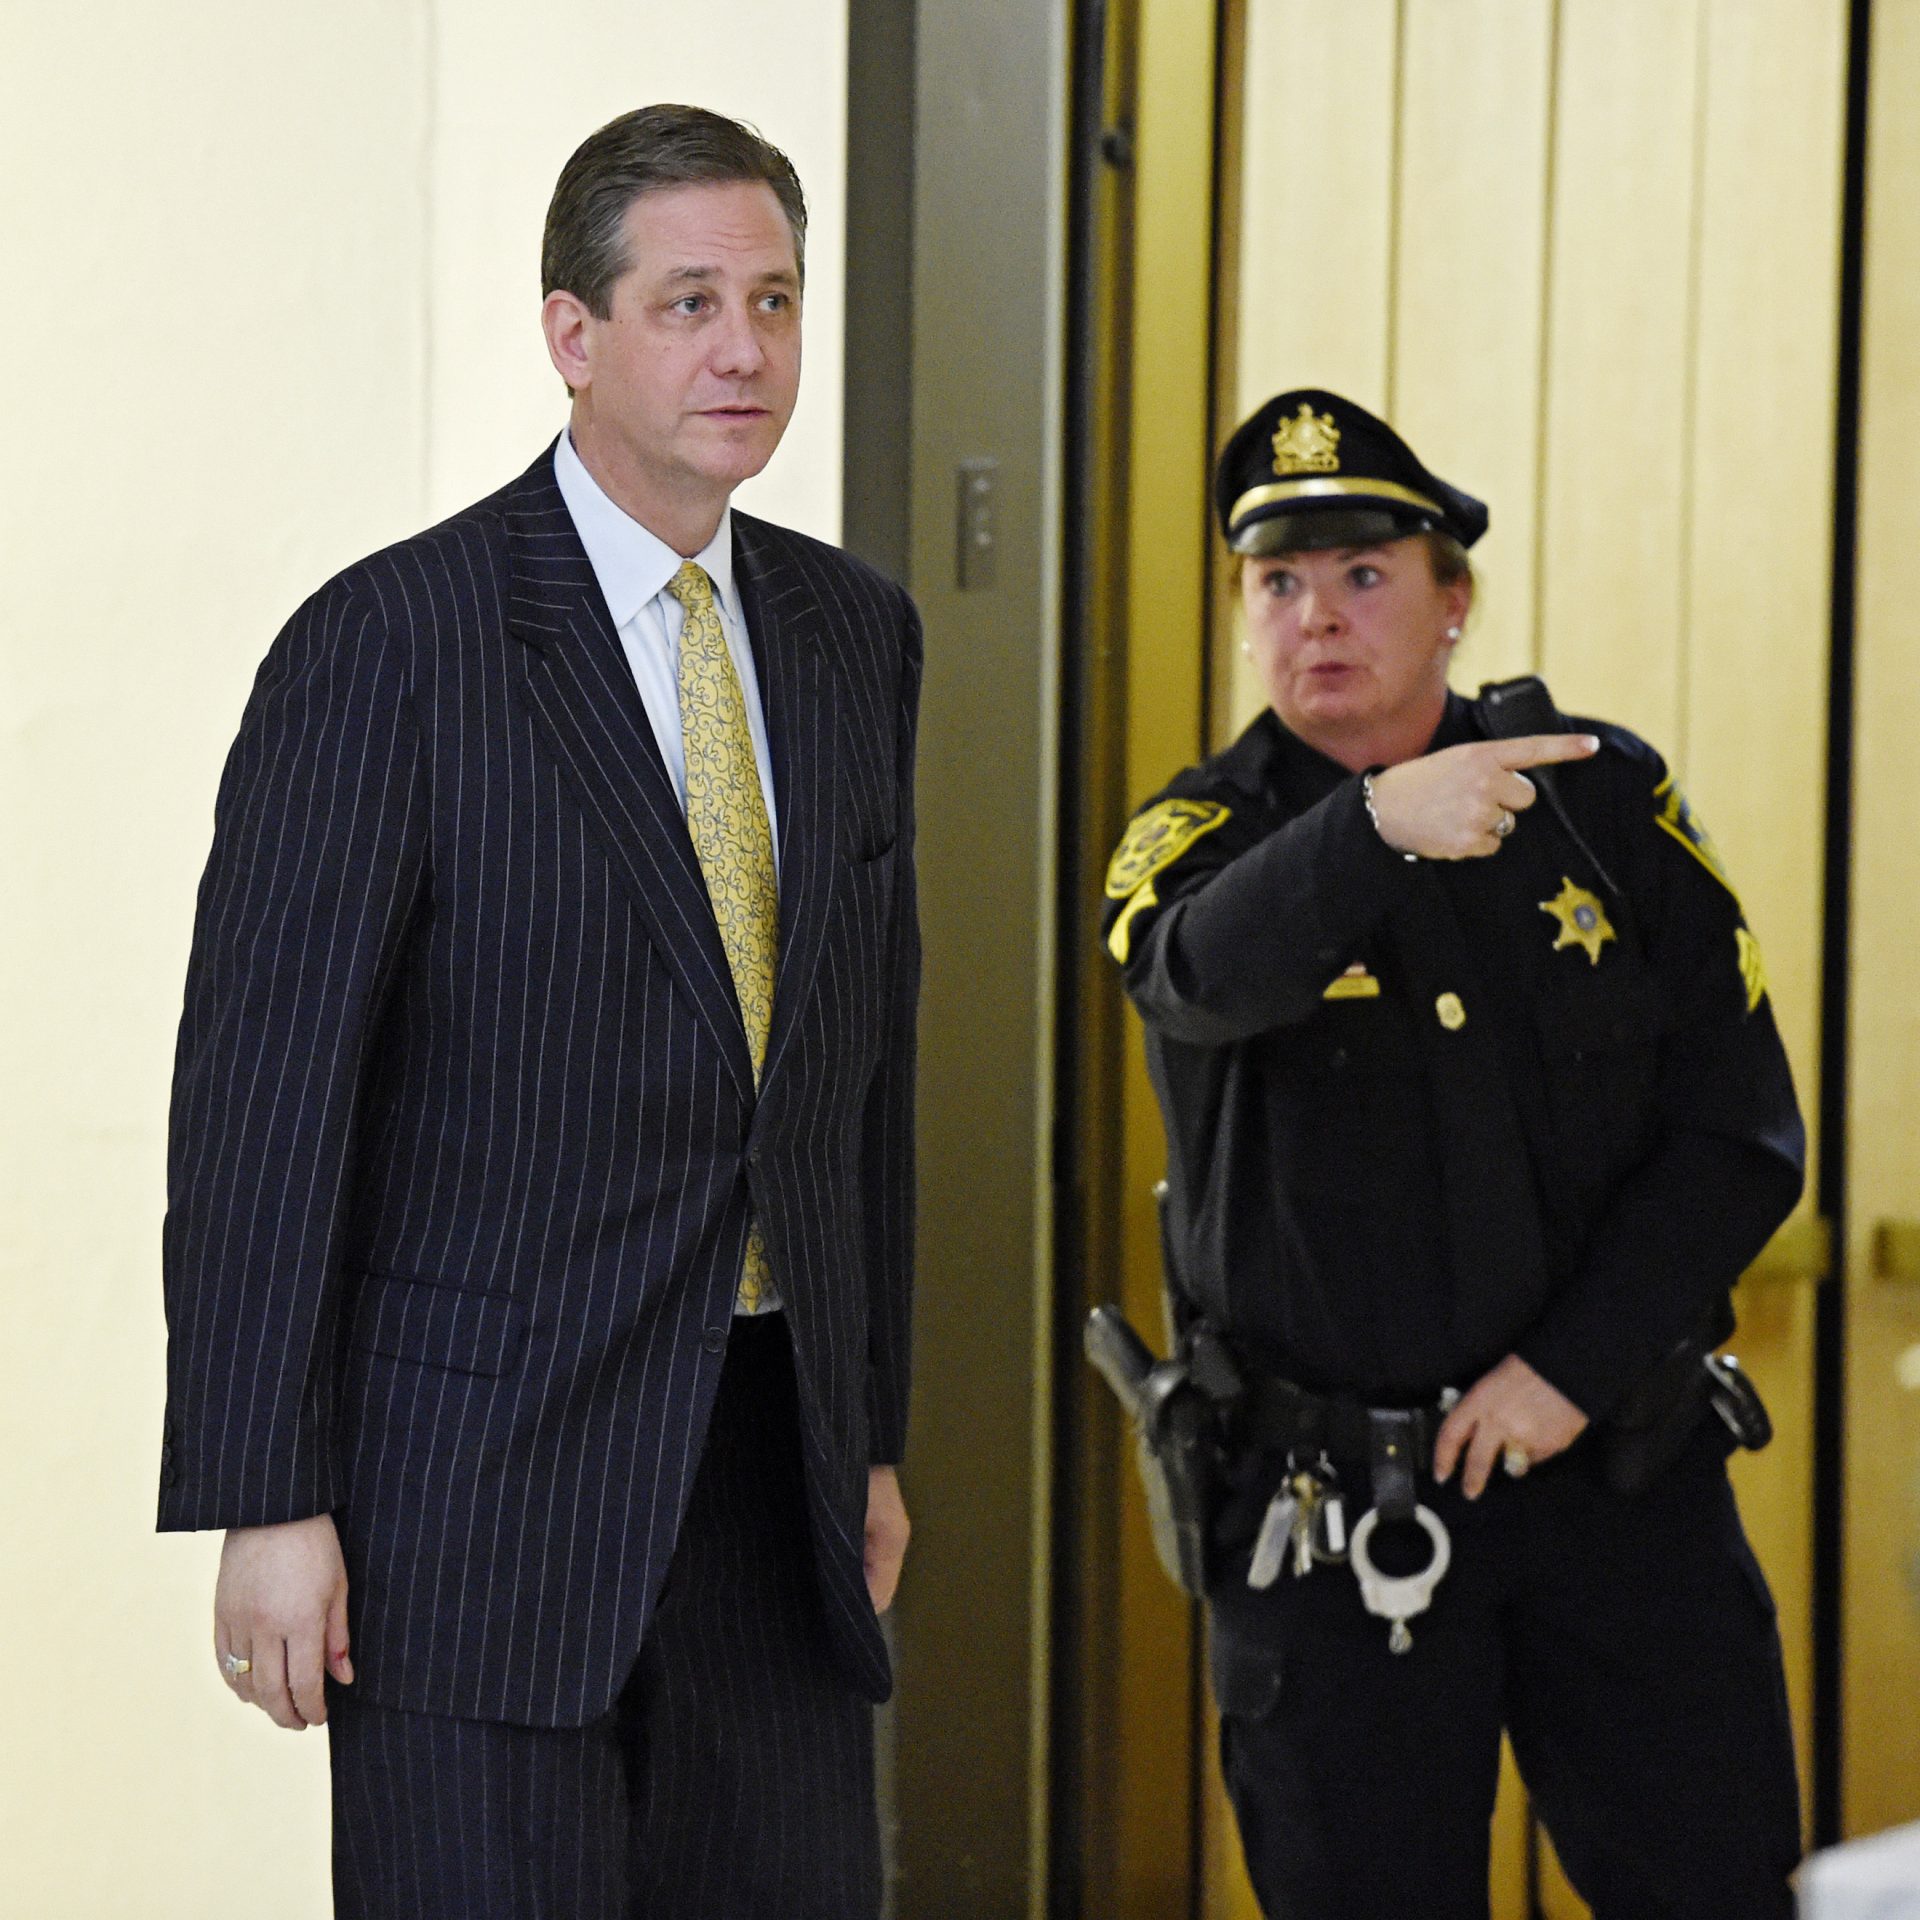 In this Feb. 2, 2016, file photo, former Montgomery County District Attorney Bruce Castor is directed to another elevator after taking the witness stand in a pretrial hearing for comedian Bill Cosby and his sexual assault case, as he leaves Montgomery County Courtroom A in Norristown, Pa.